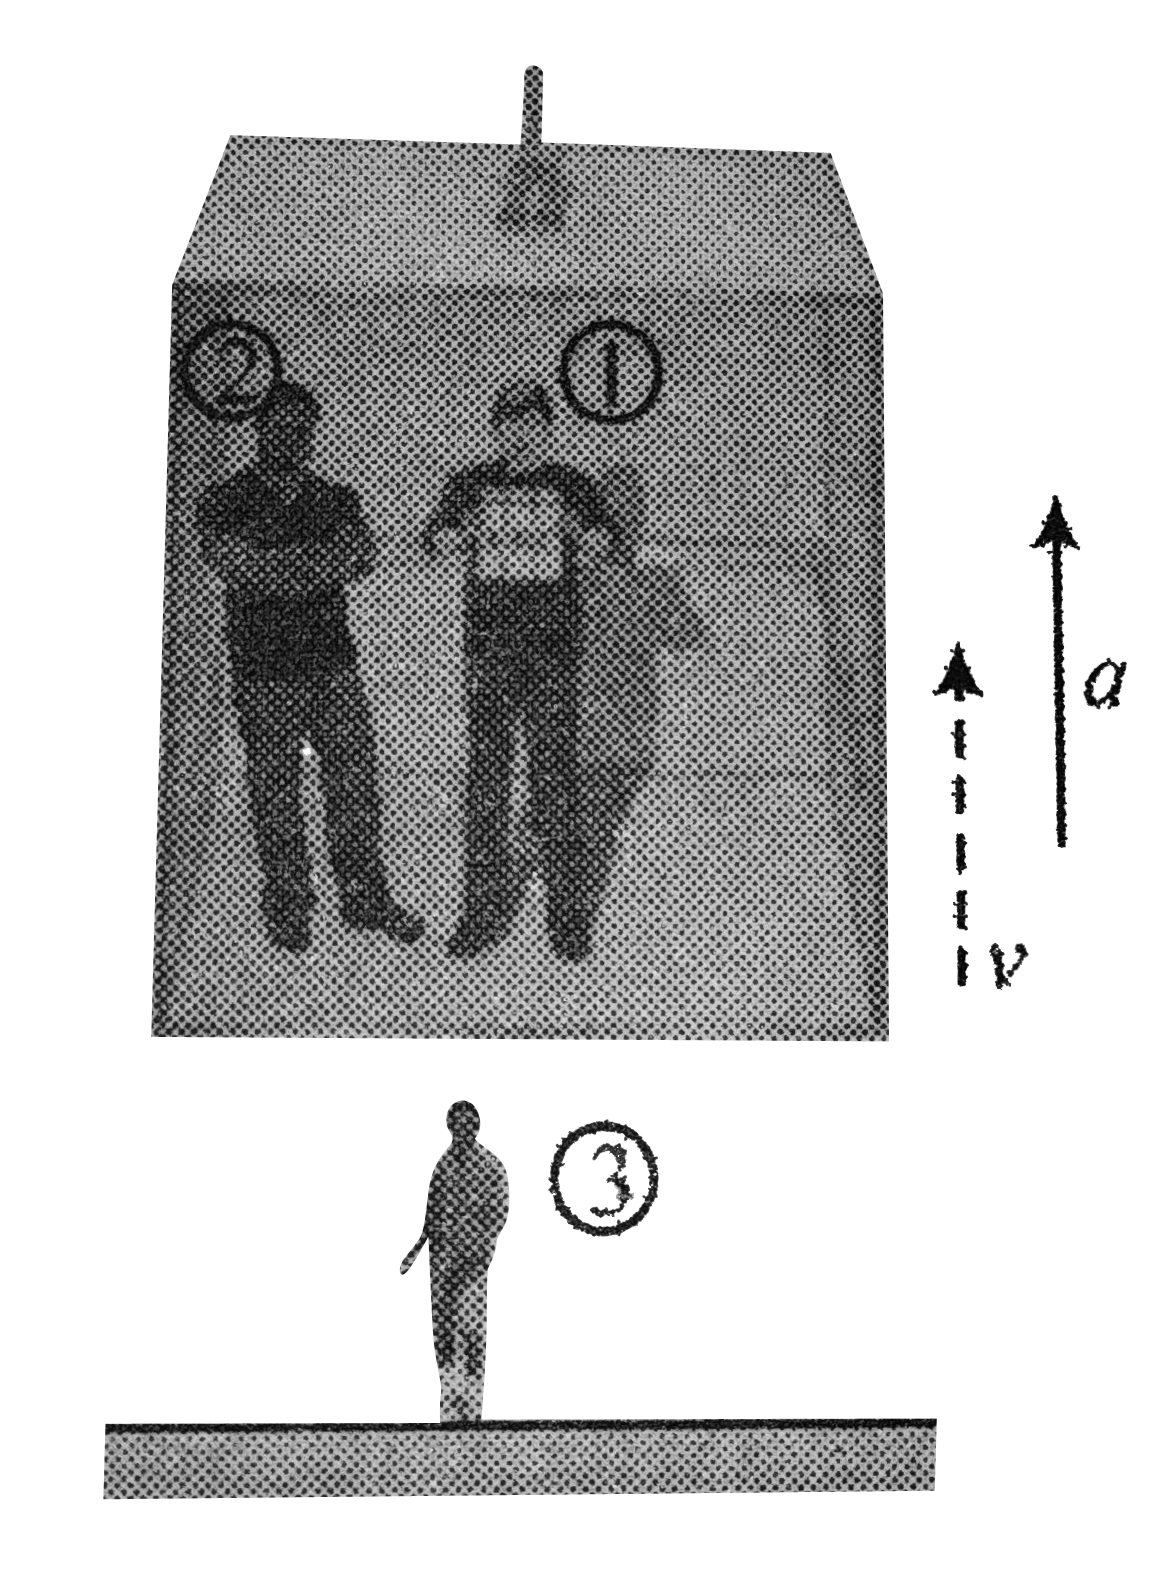 A man(1) of mass m strands on an elevator moving with upward acceleration a. A man(2) is standing on the elevator. Elevator starts with initial velocity v0 at time t=0. Consider time interval t from beginning.   a. What is the work done by normal contact force and gravity on the man(1) as observe by man(2) standing on the elevator and man(3) standing on ground?   b. What is the net work done by normal contact force between man(1) and elevator?